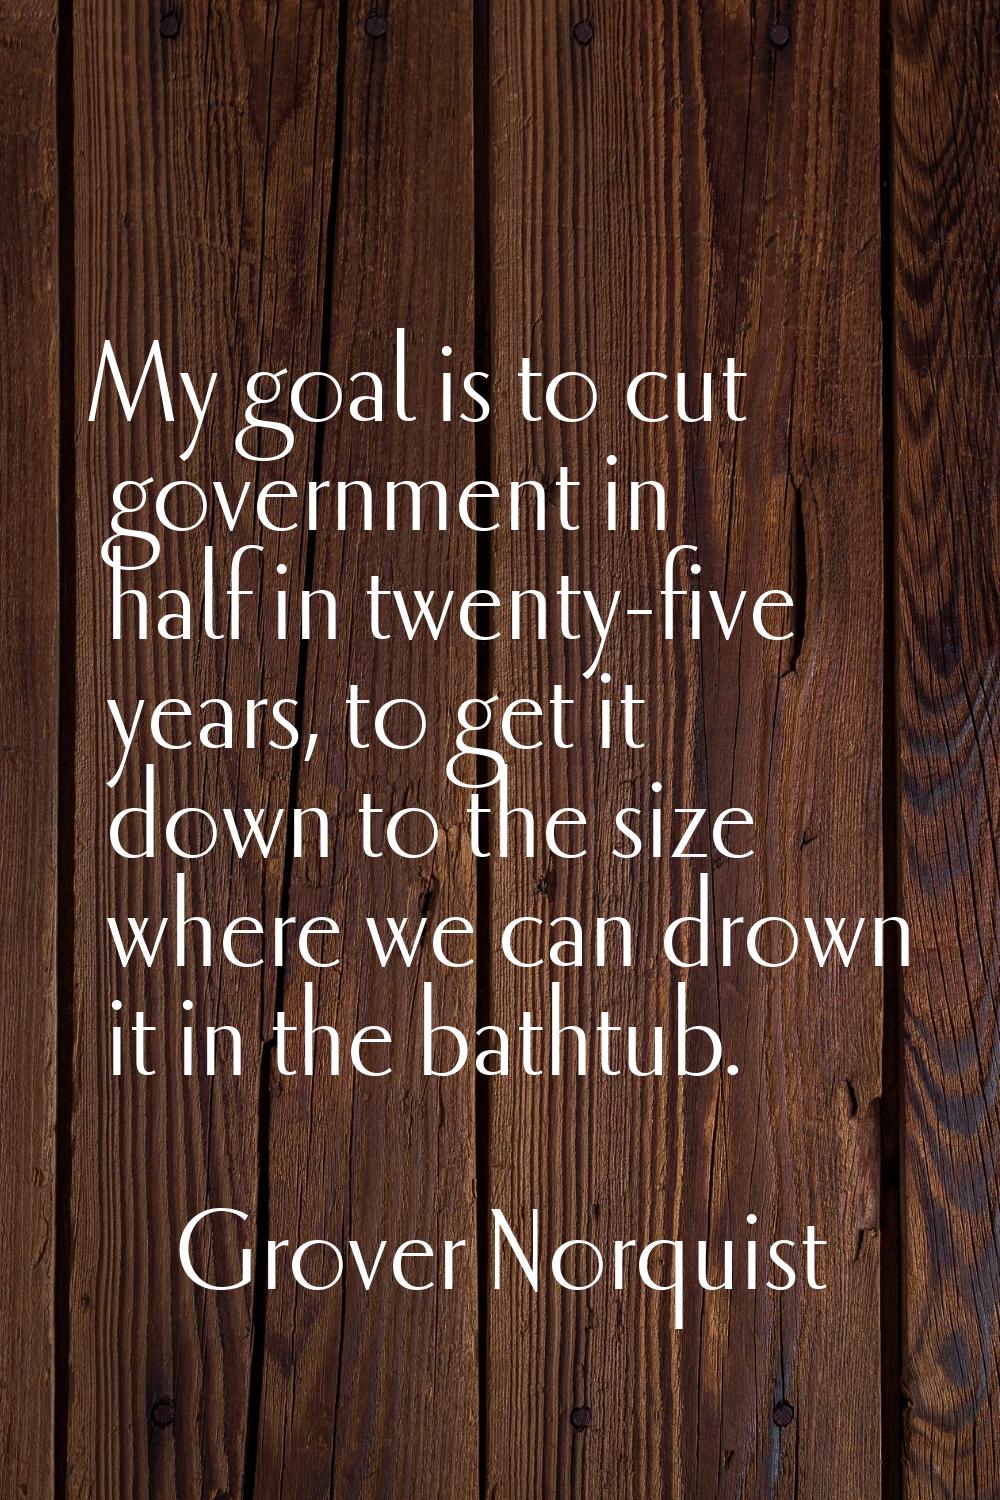 My goal is to cut government in half in twenty-five years, to get it down to the size where we can 